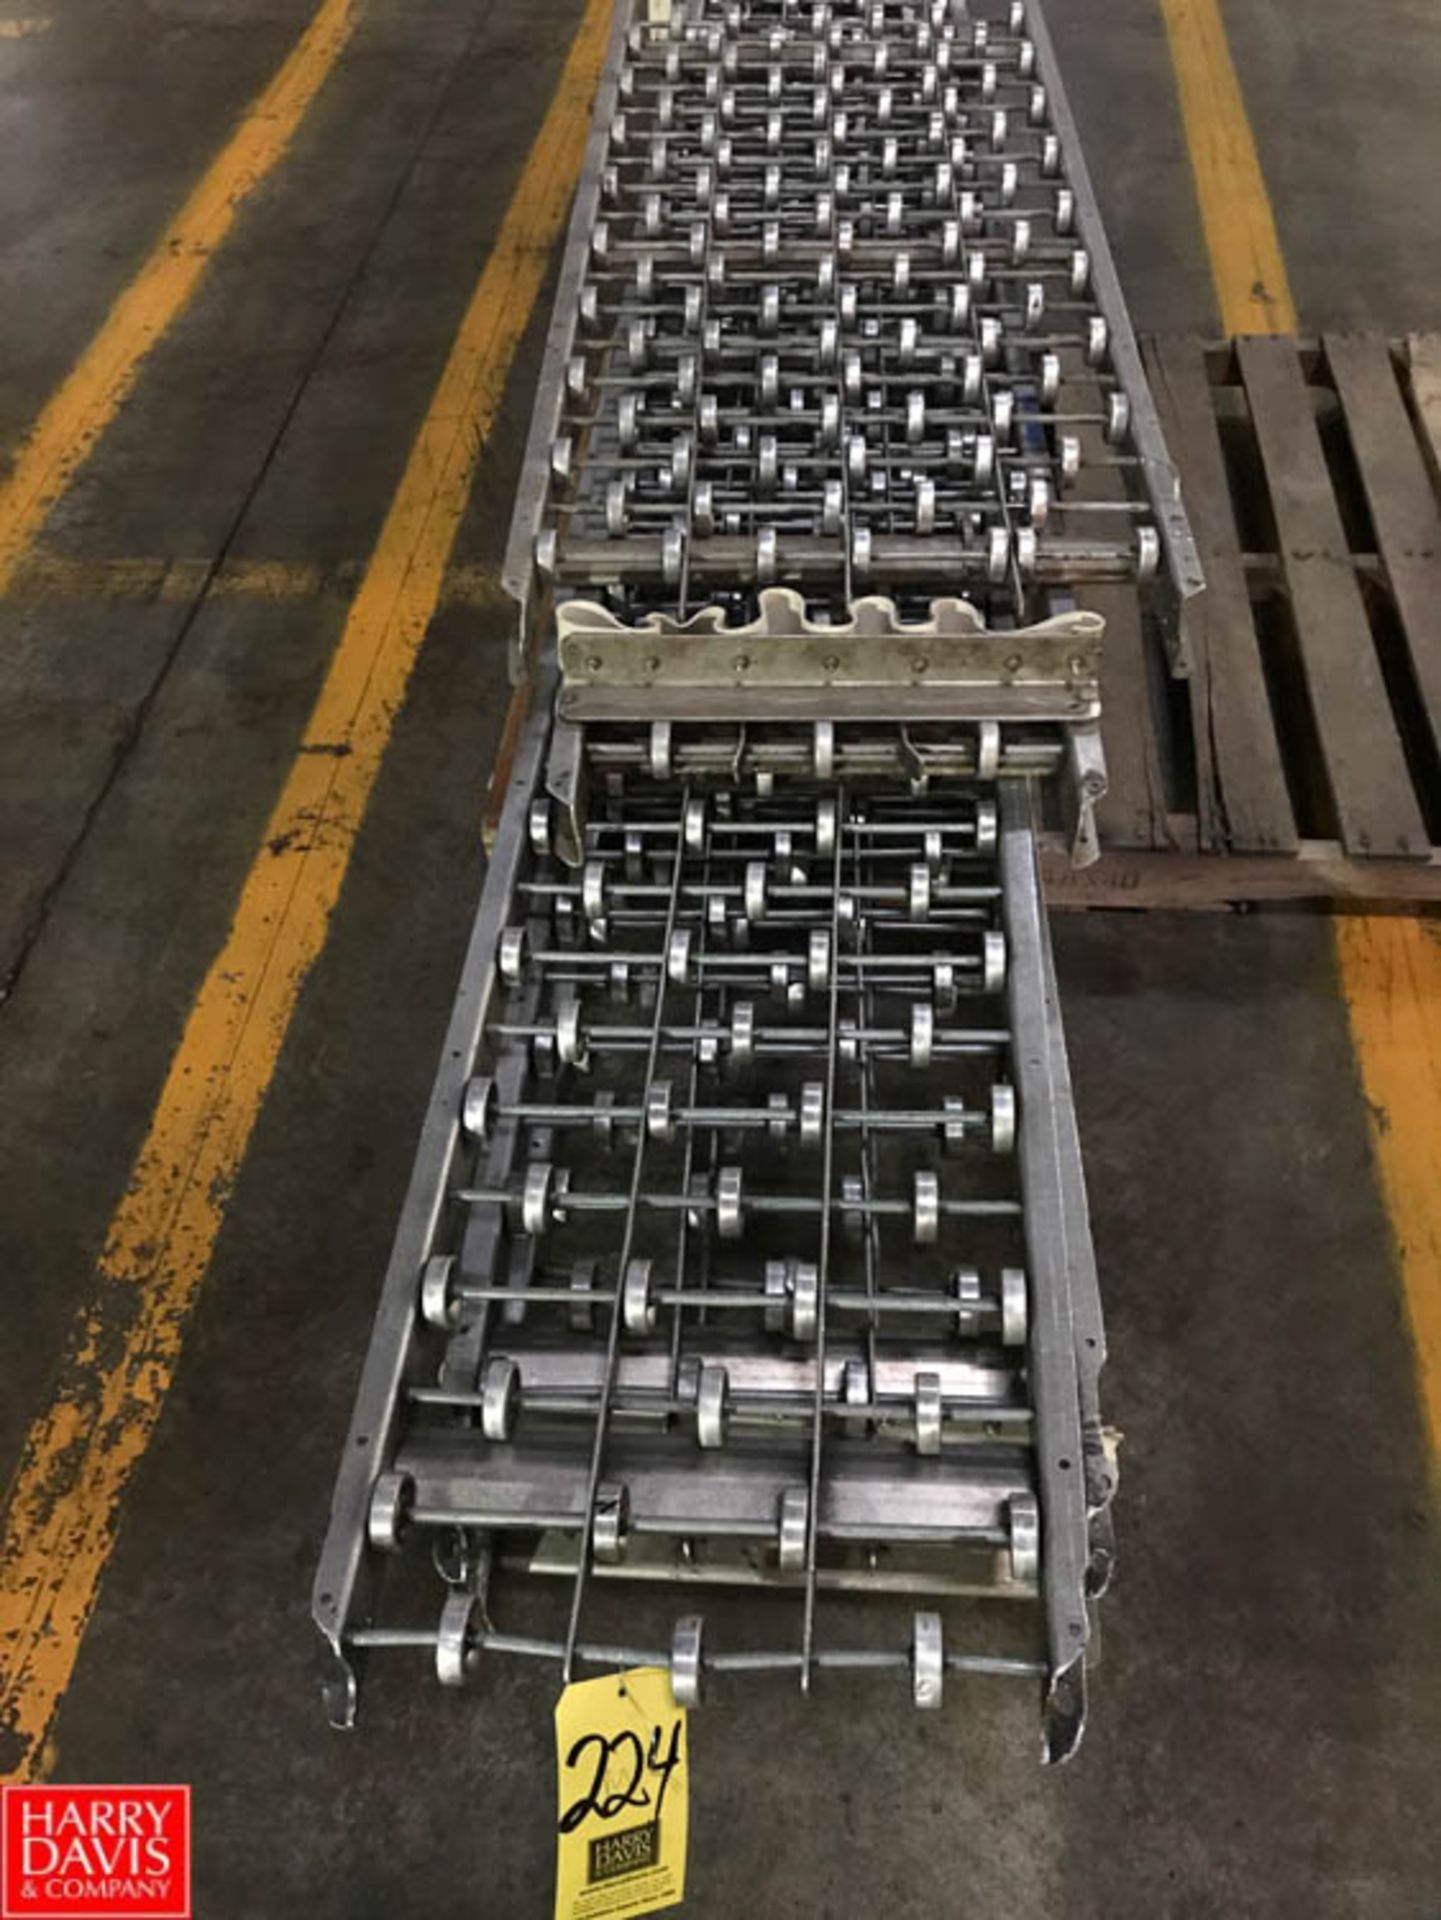 Sections of Skate Conveyor Rigging Fee: 75, PLEASE NOTE: Your bids are multiplied by the quantity of